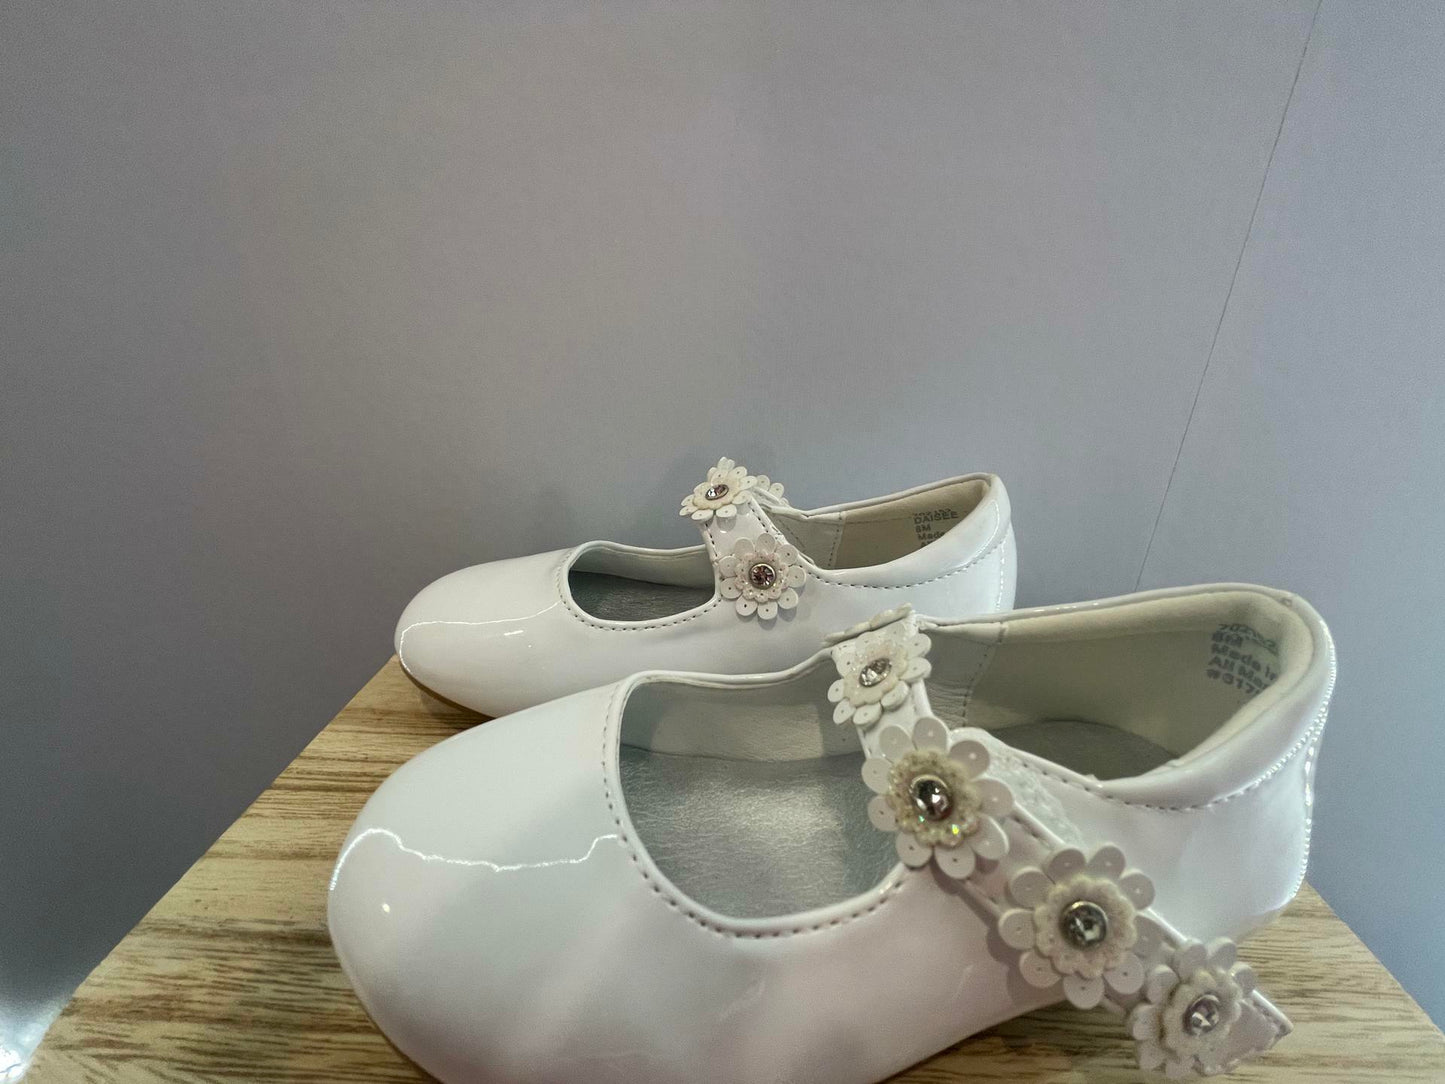 Cupcake Couture Girls Floral Strap Shoes WHITE Flowers- size 8M - Very Good